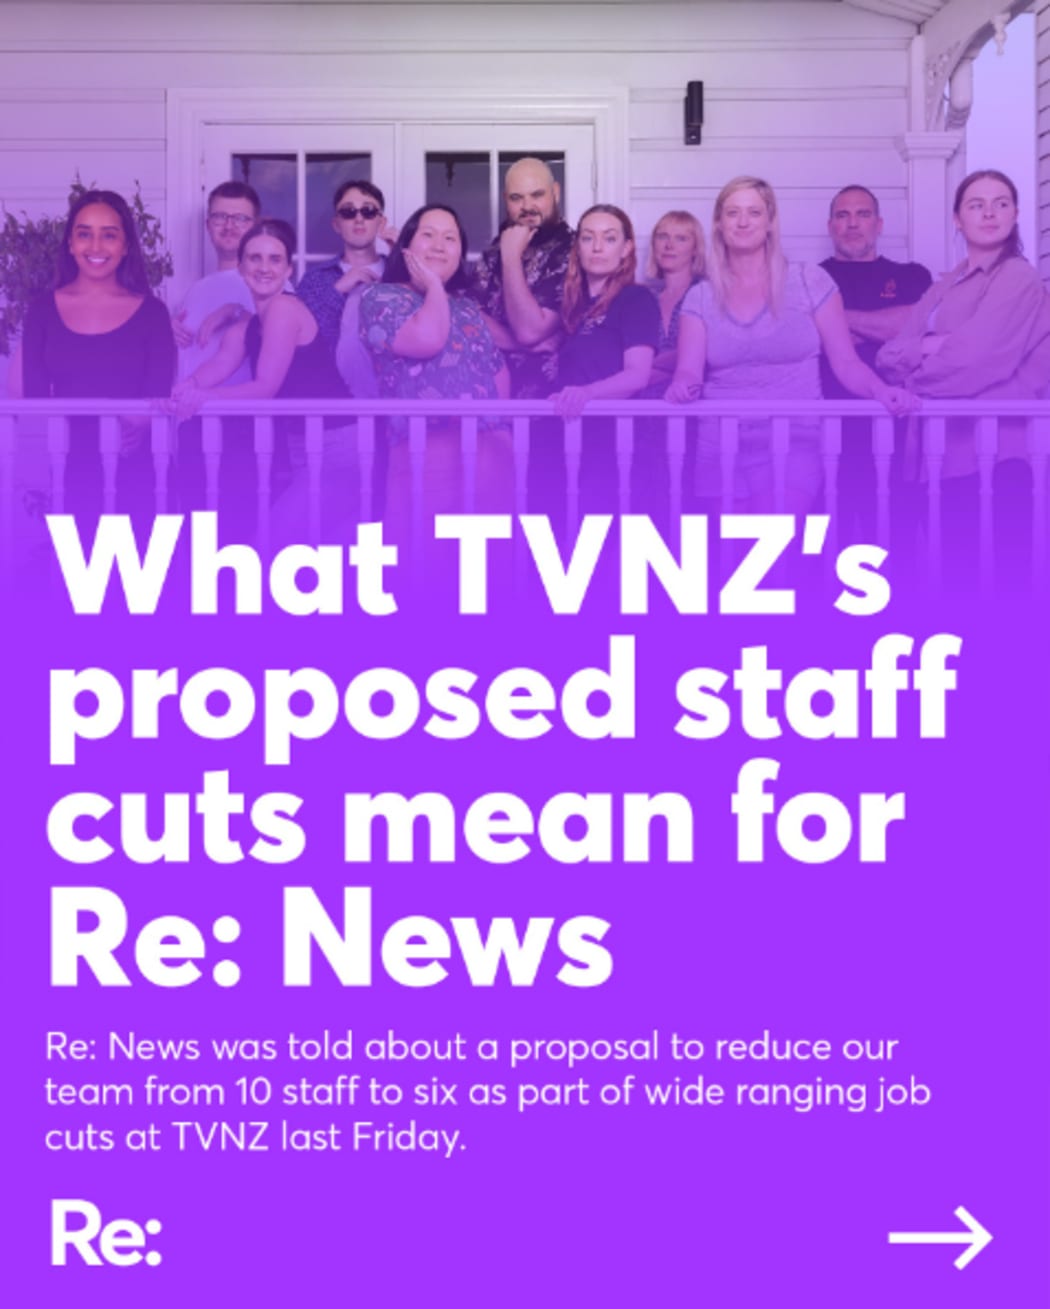 A screenshot of Re: News' Instagram post responding to TVNZ proposed staff cuts.